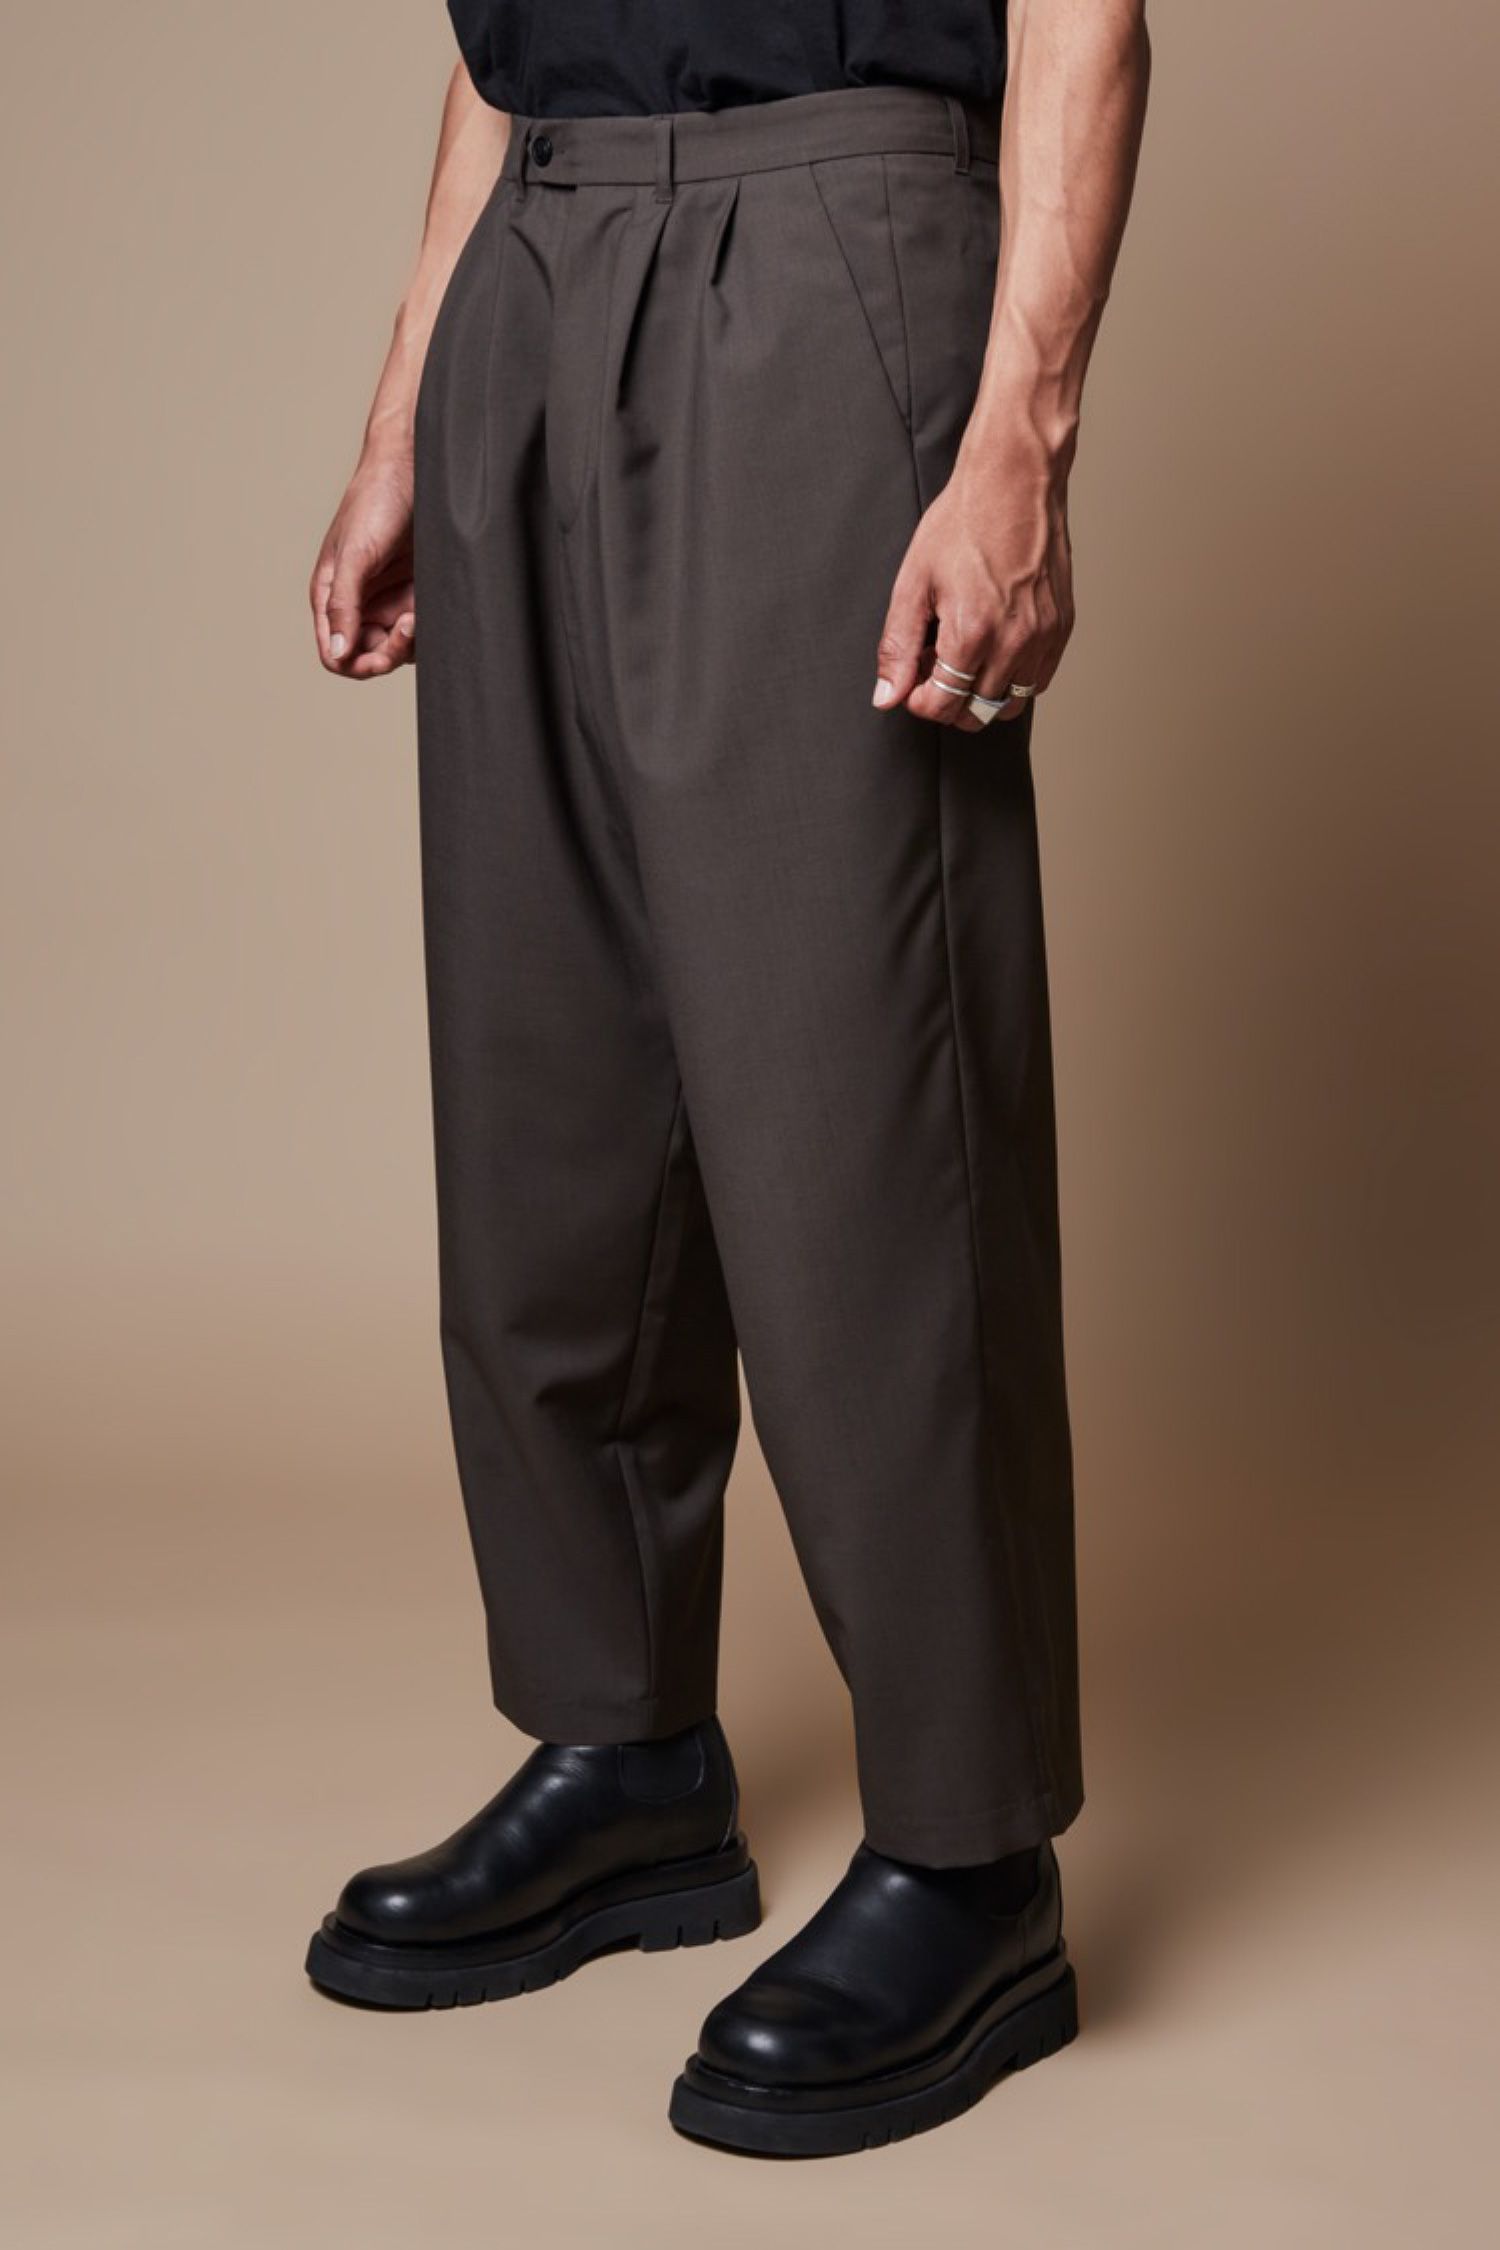 lownn/w pleated wide trousers 2タックパンツ-